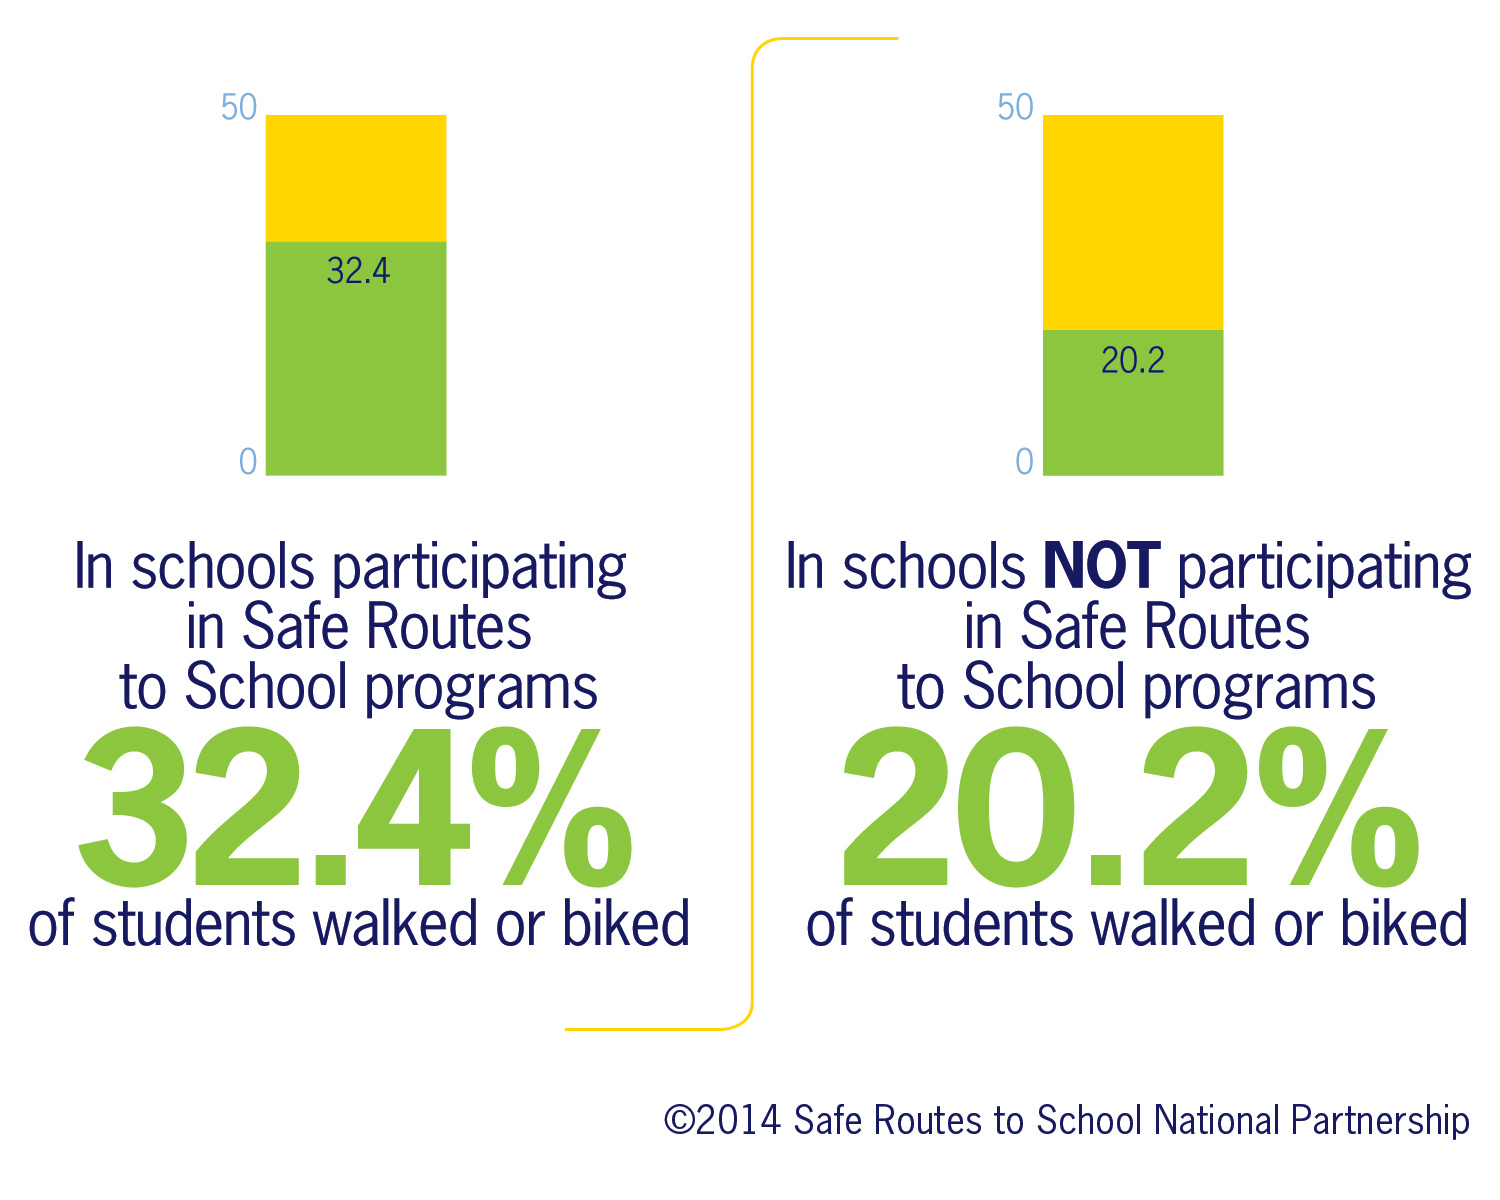 Safe Routes Efficacy detail image